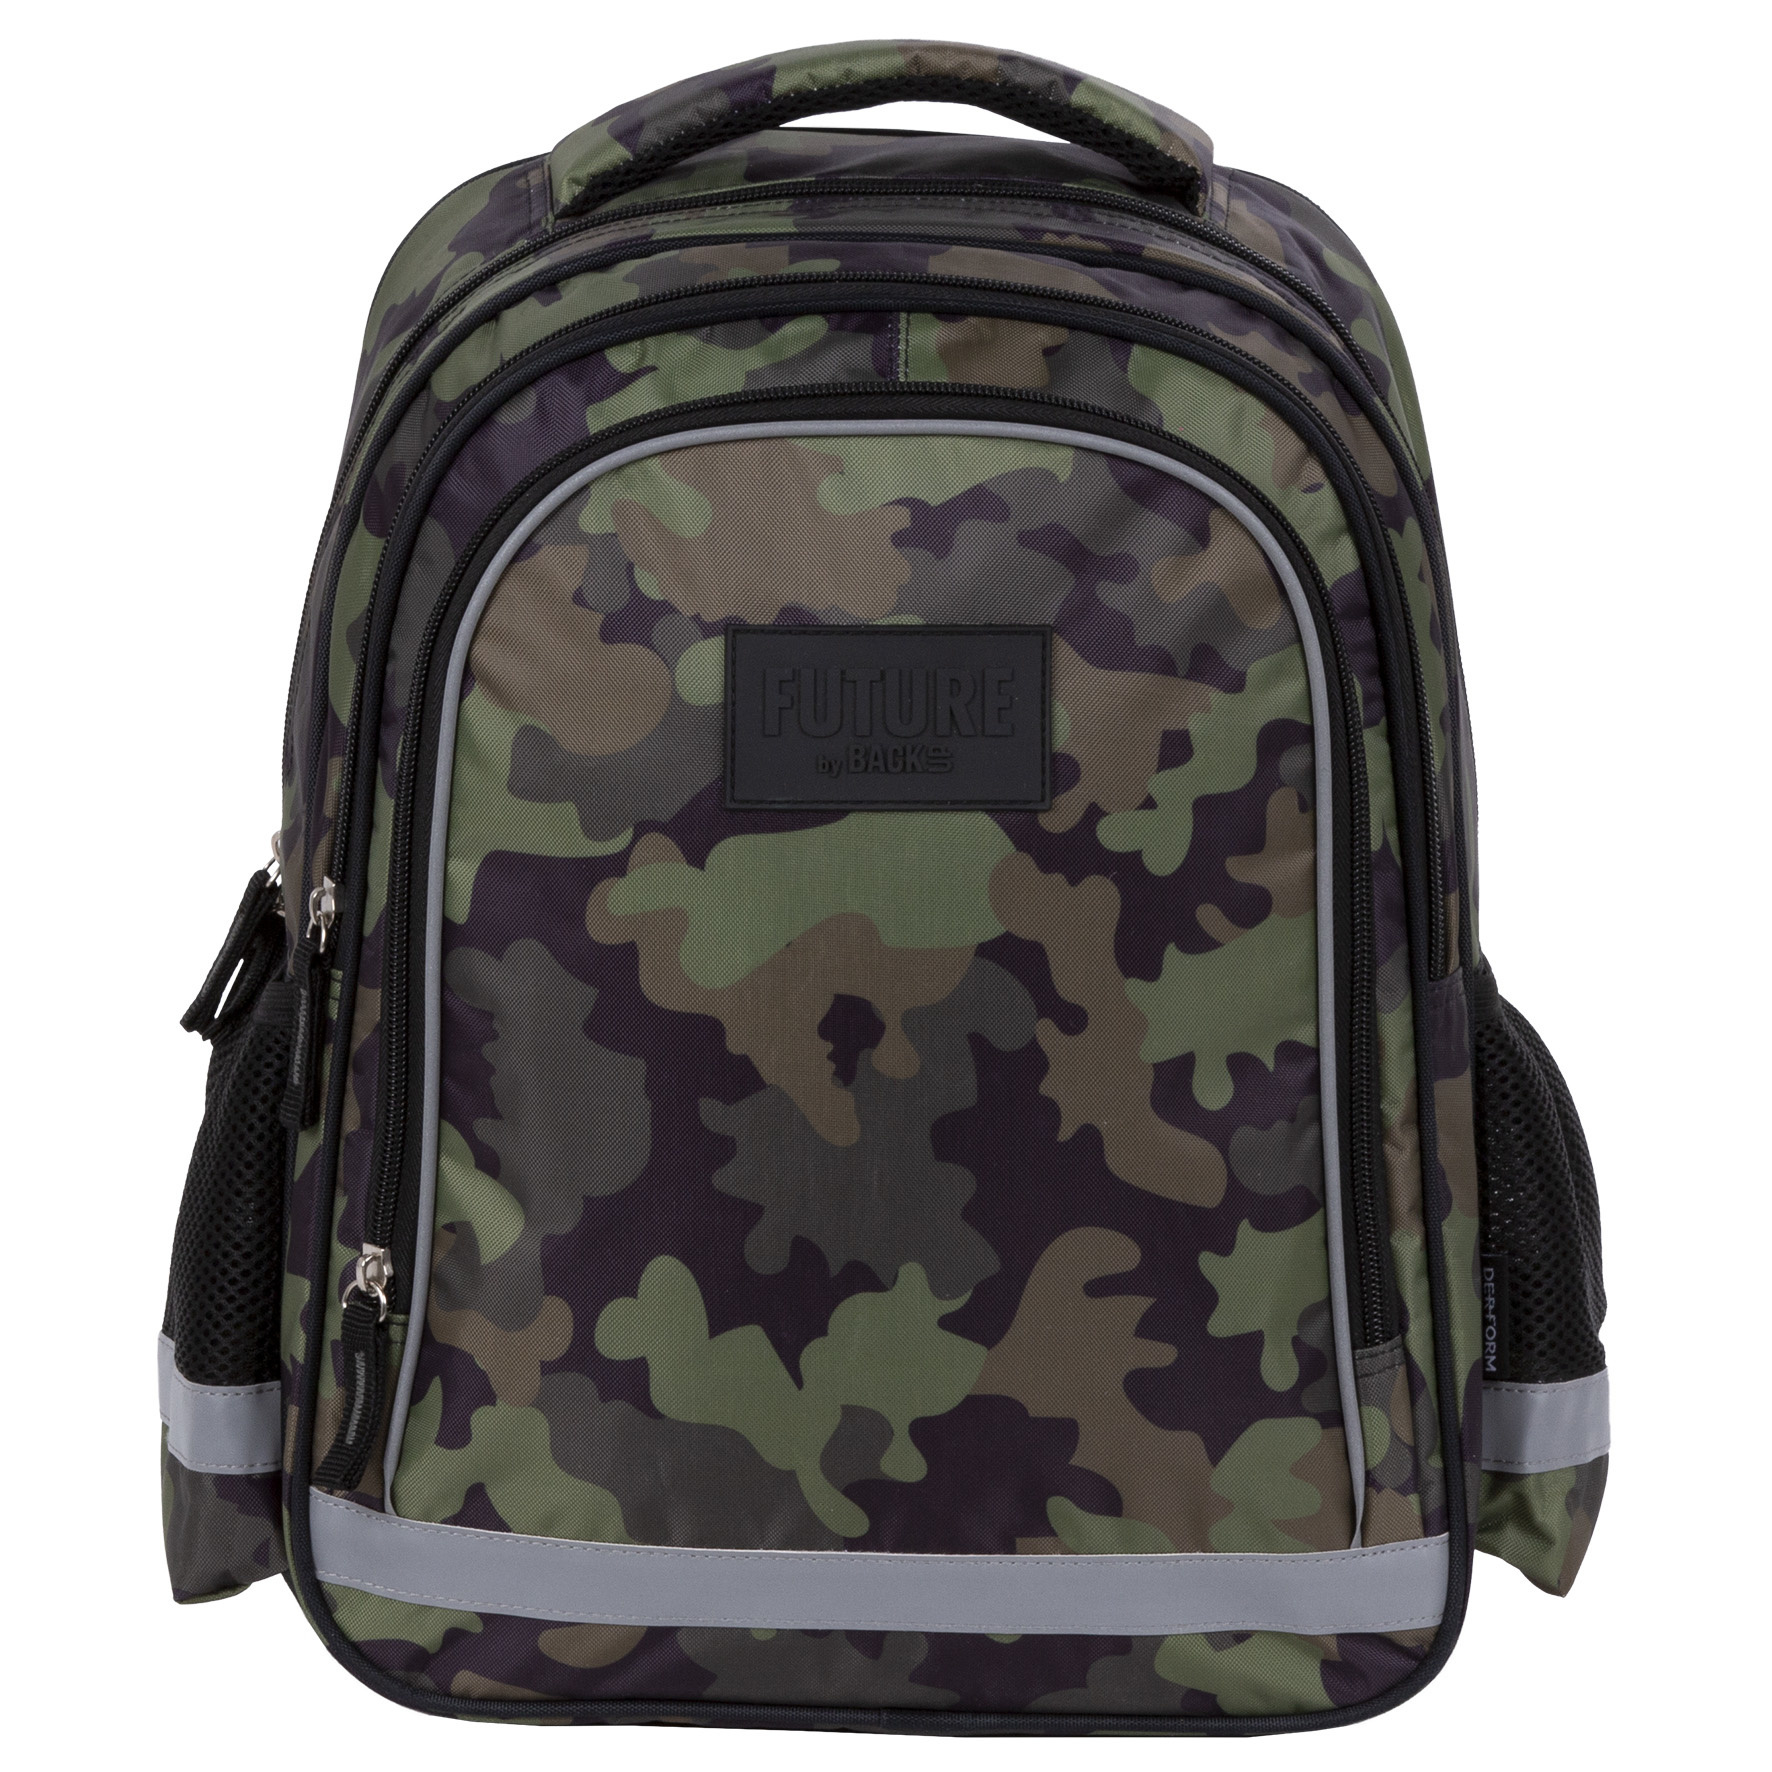 Camouflage Backpack - 38 x 28 x 17 cm - Polyester